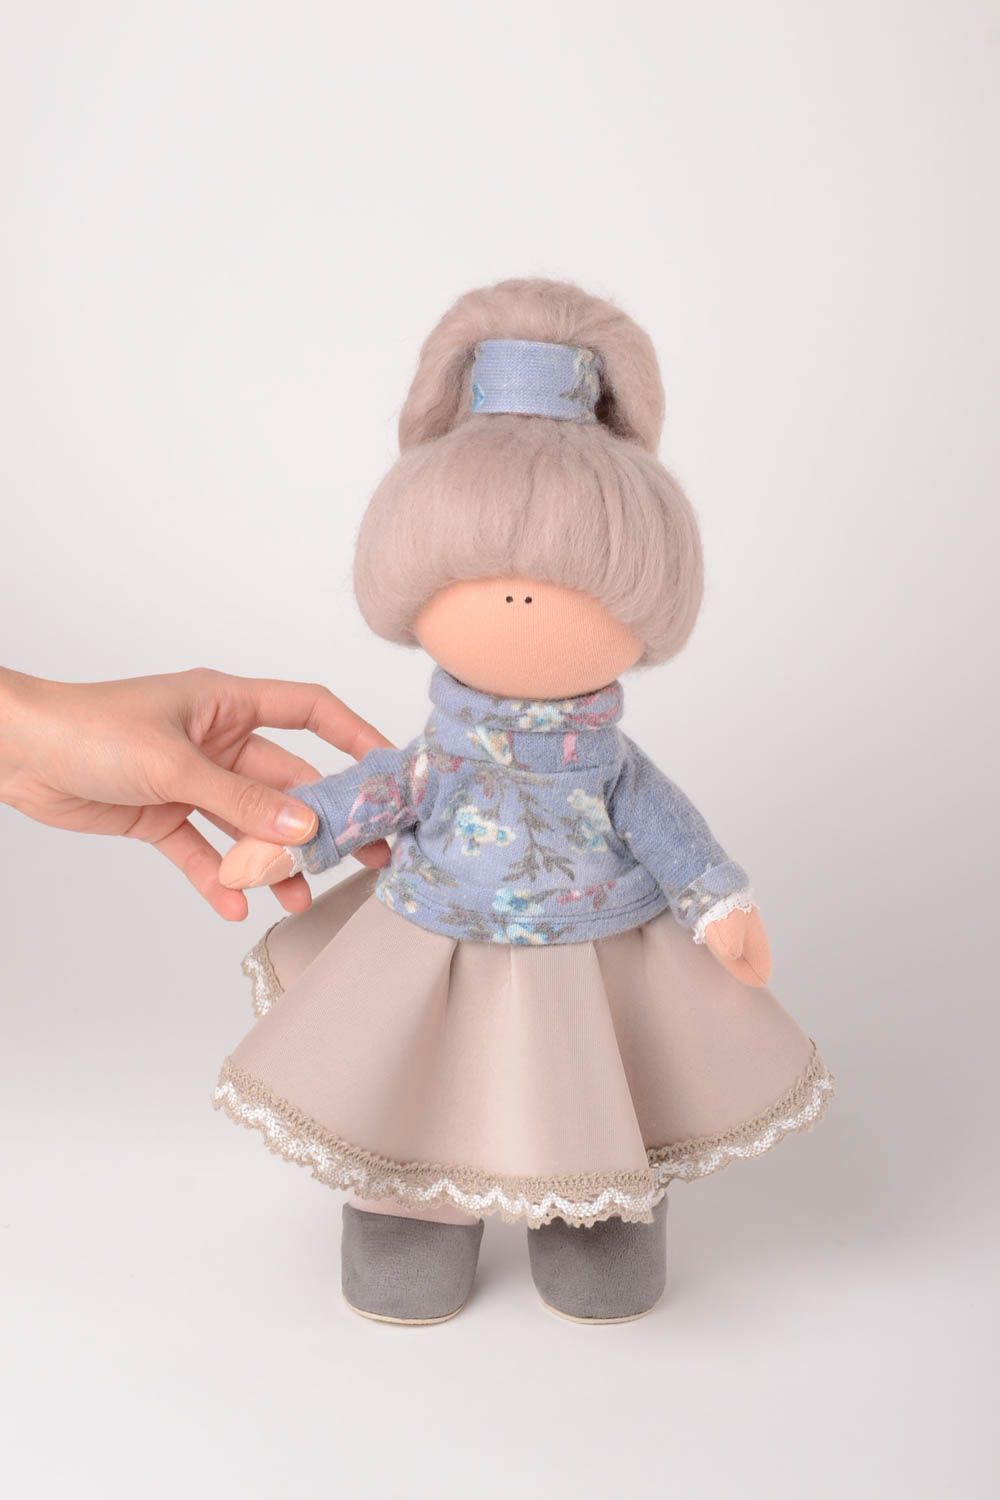 Handmade textile toy unusual designer accessories beautiful lovely doll photo 2